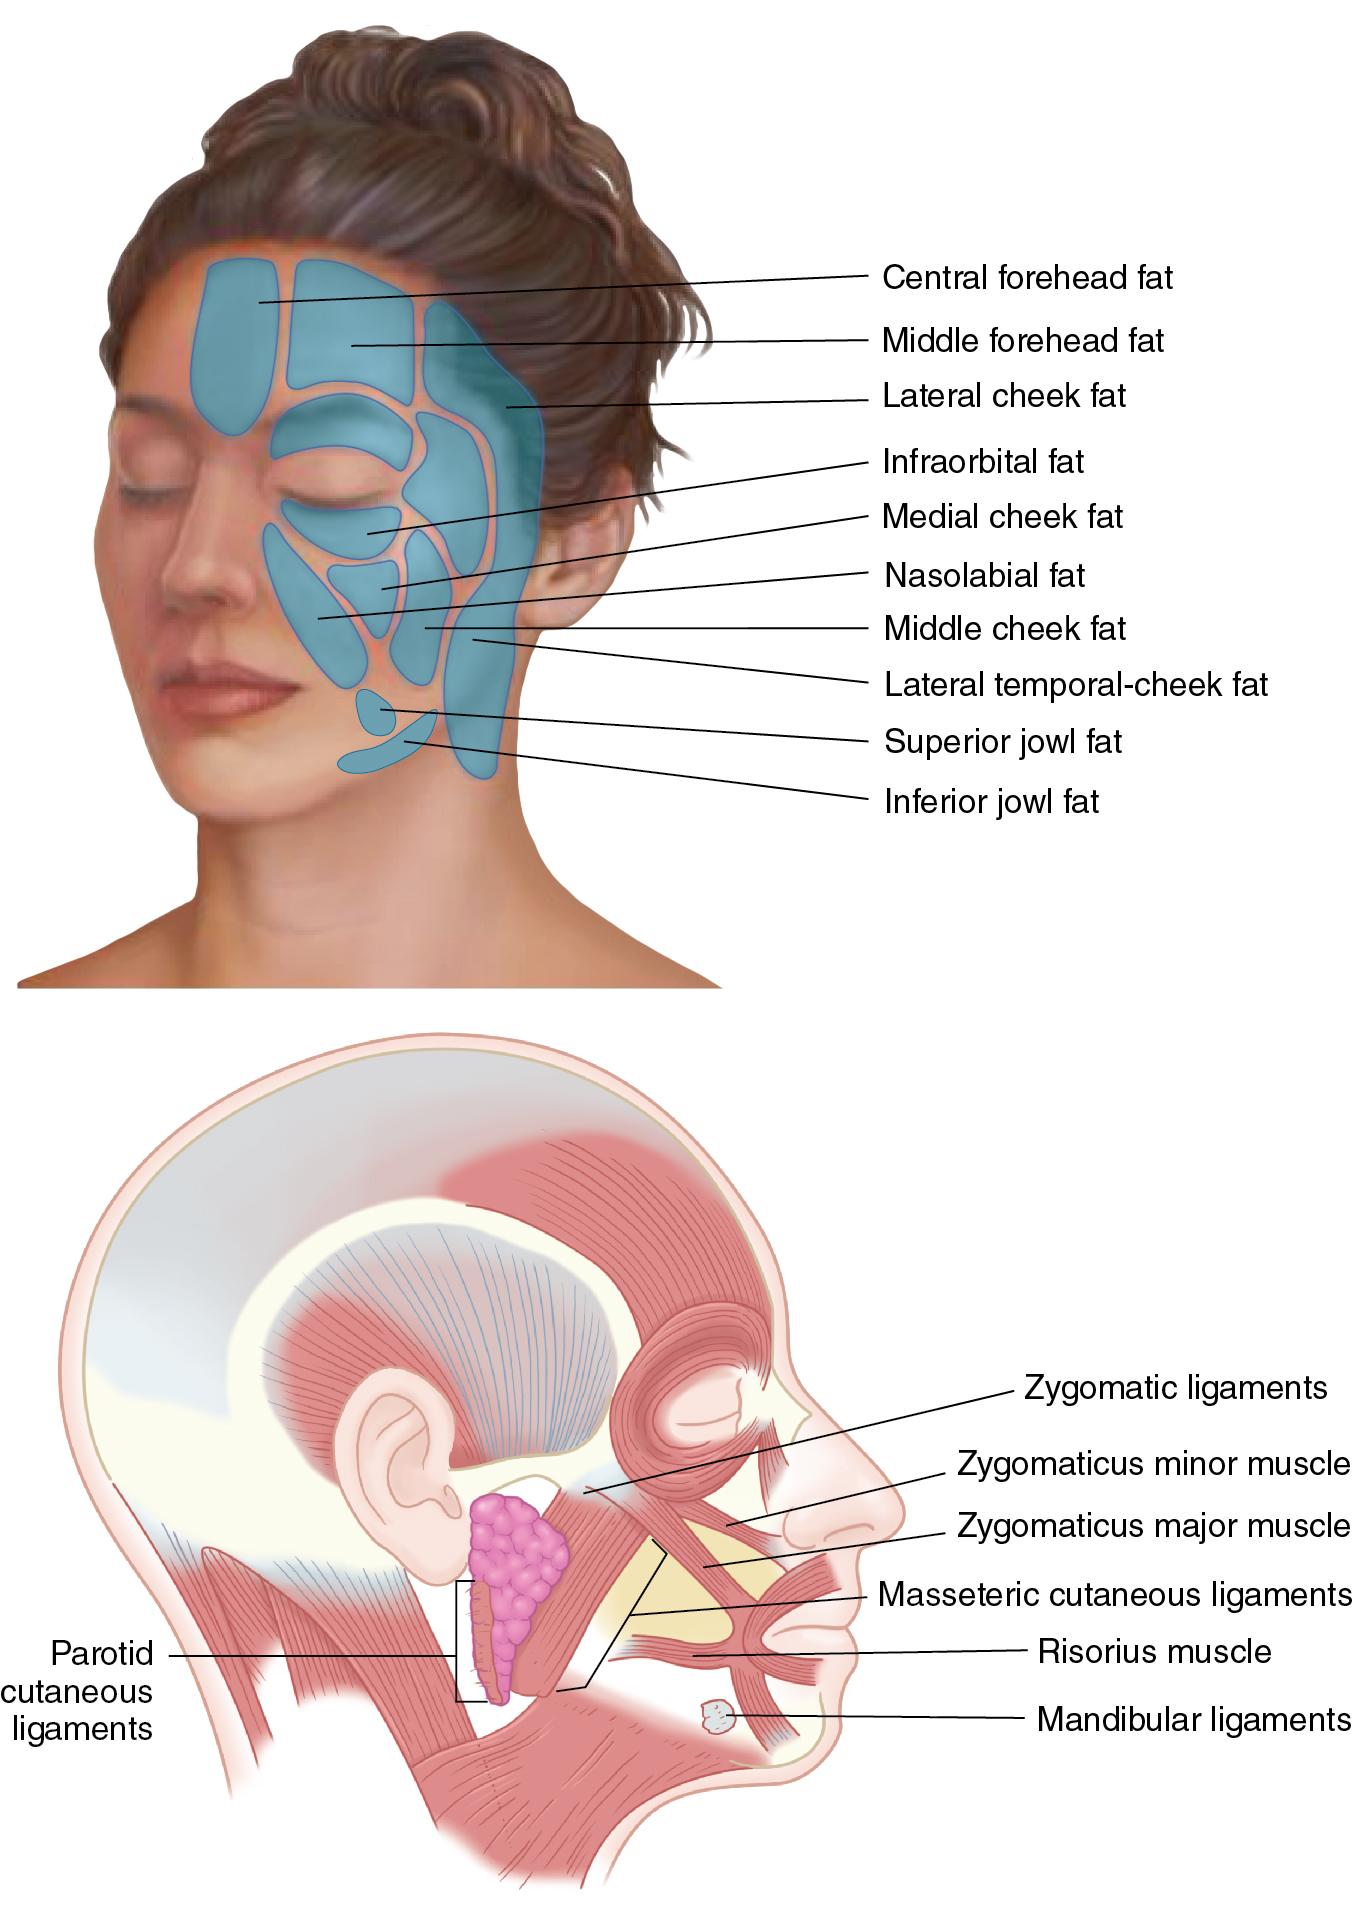 Fig. 10.3, Subcutaneous compartments of the face and their relationship to the zygomaticus major muscle.